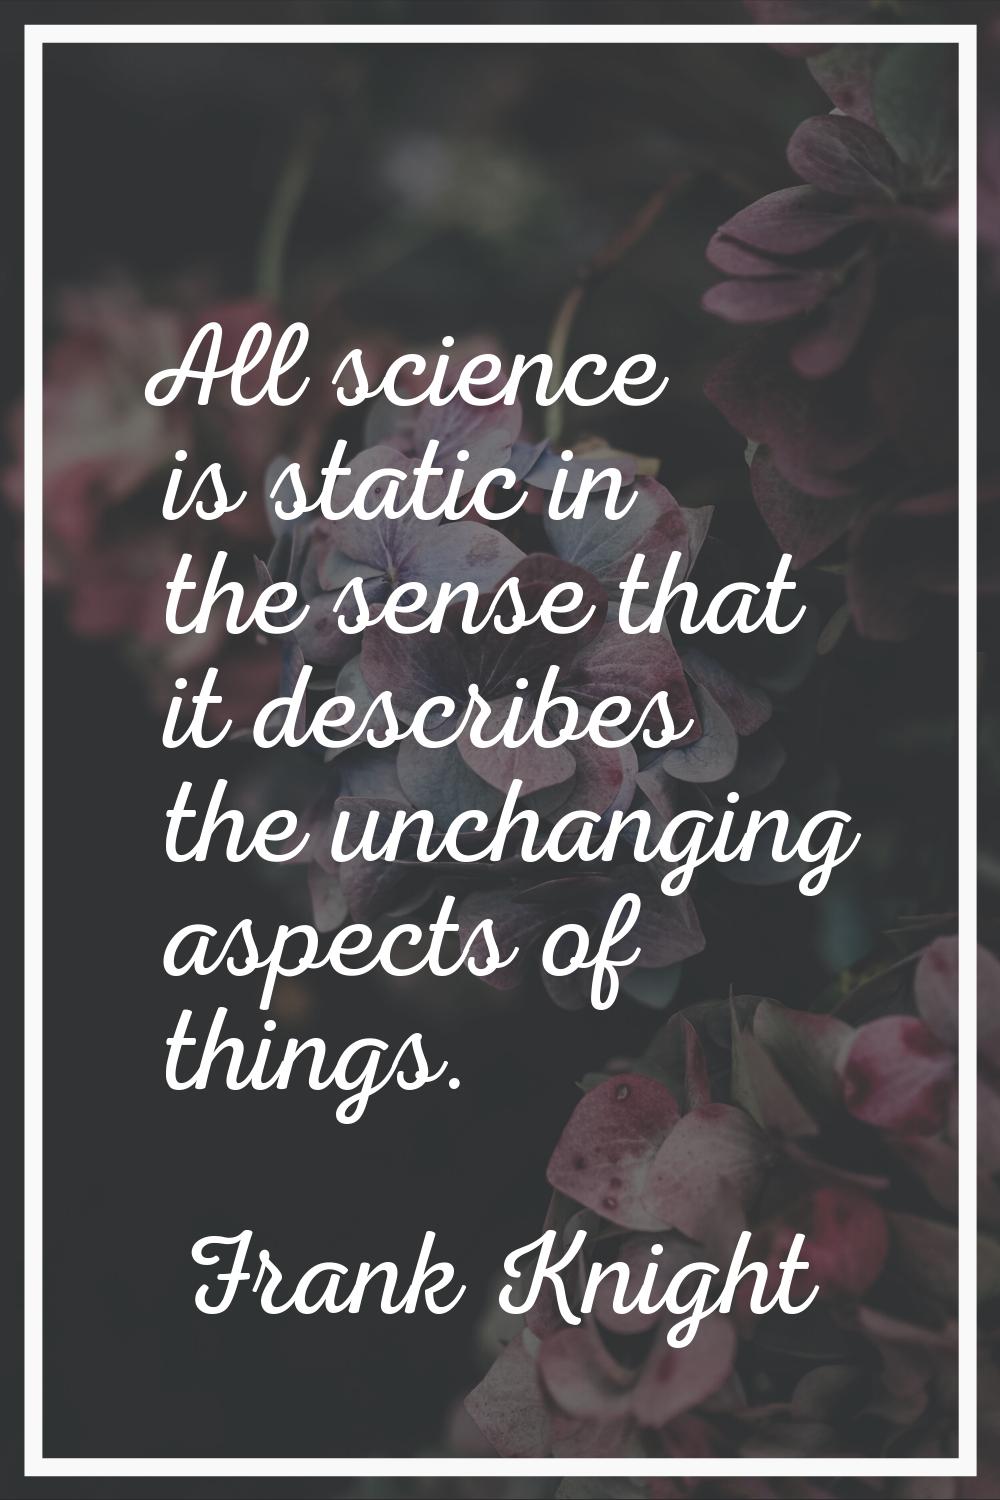 All science is static in the sense that it describes the unchanging aspects of things.